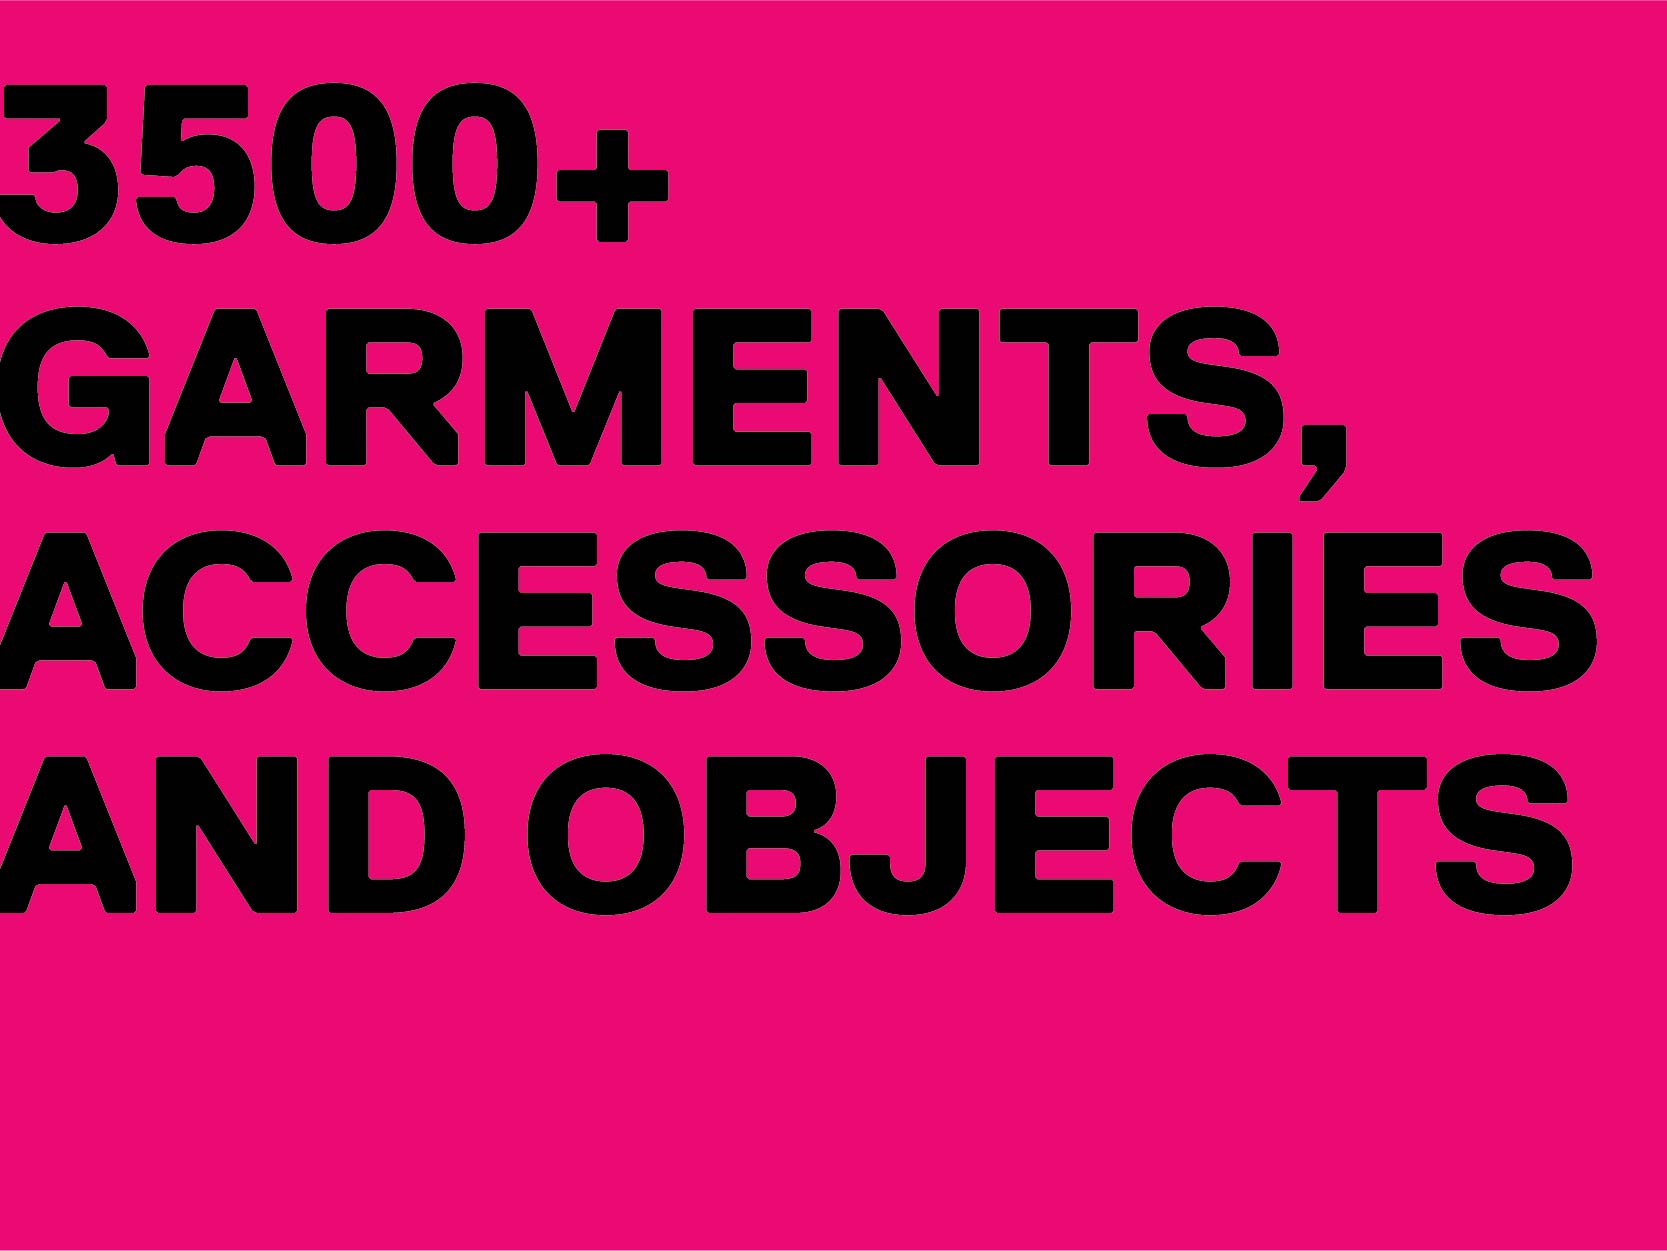 3500+ garments, accessories and objects.